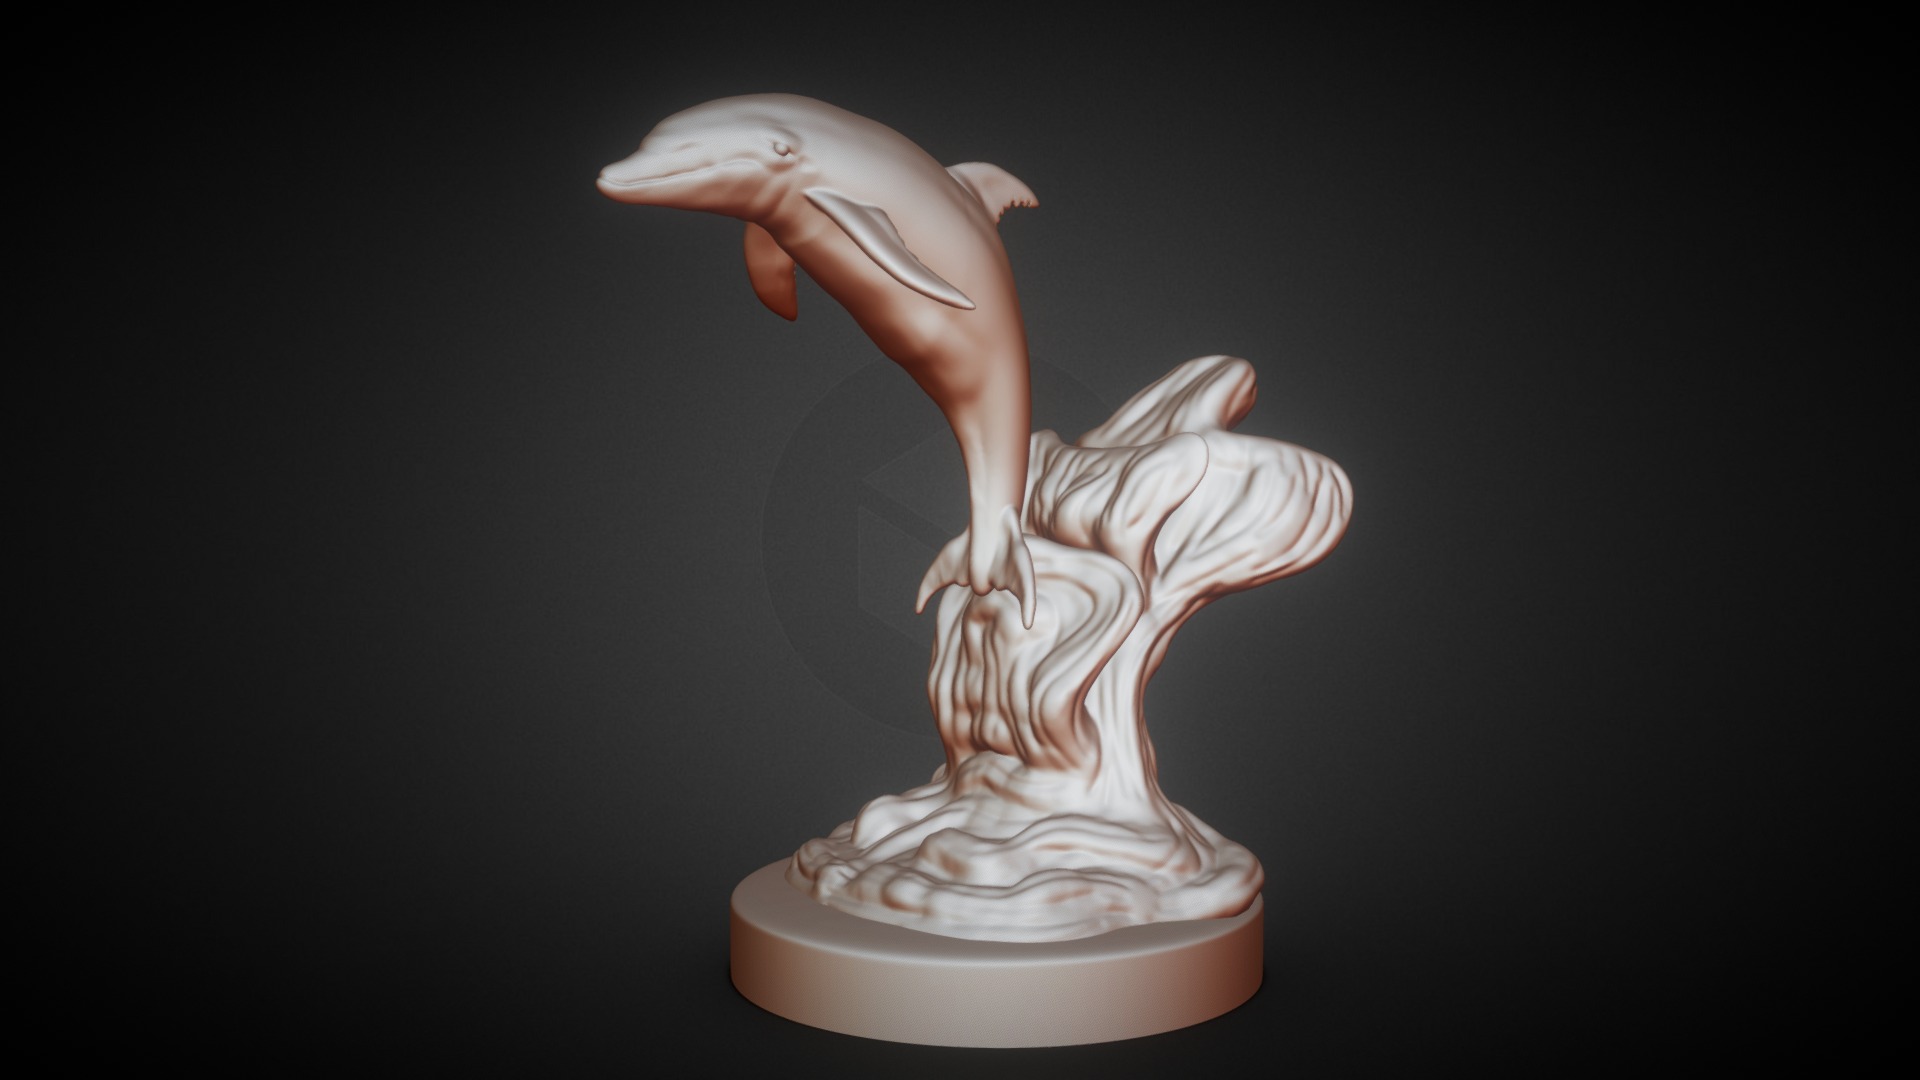 3D model Day 28 Dolphin #Sculptjanuary19 - This is a 3D model of the Day 28 Dolphin #Sculptjanuary19. The 3D model is about a white statue of a horse.